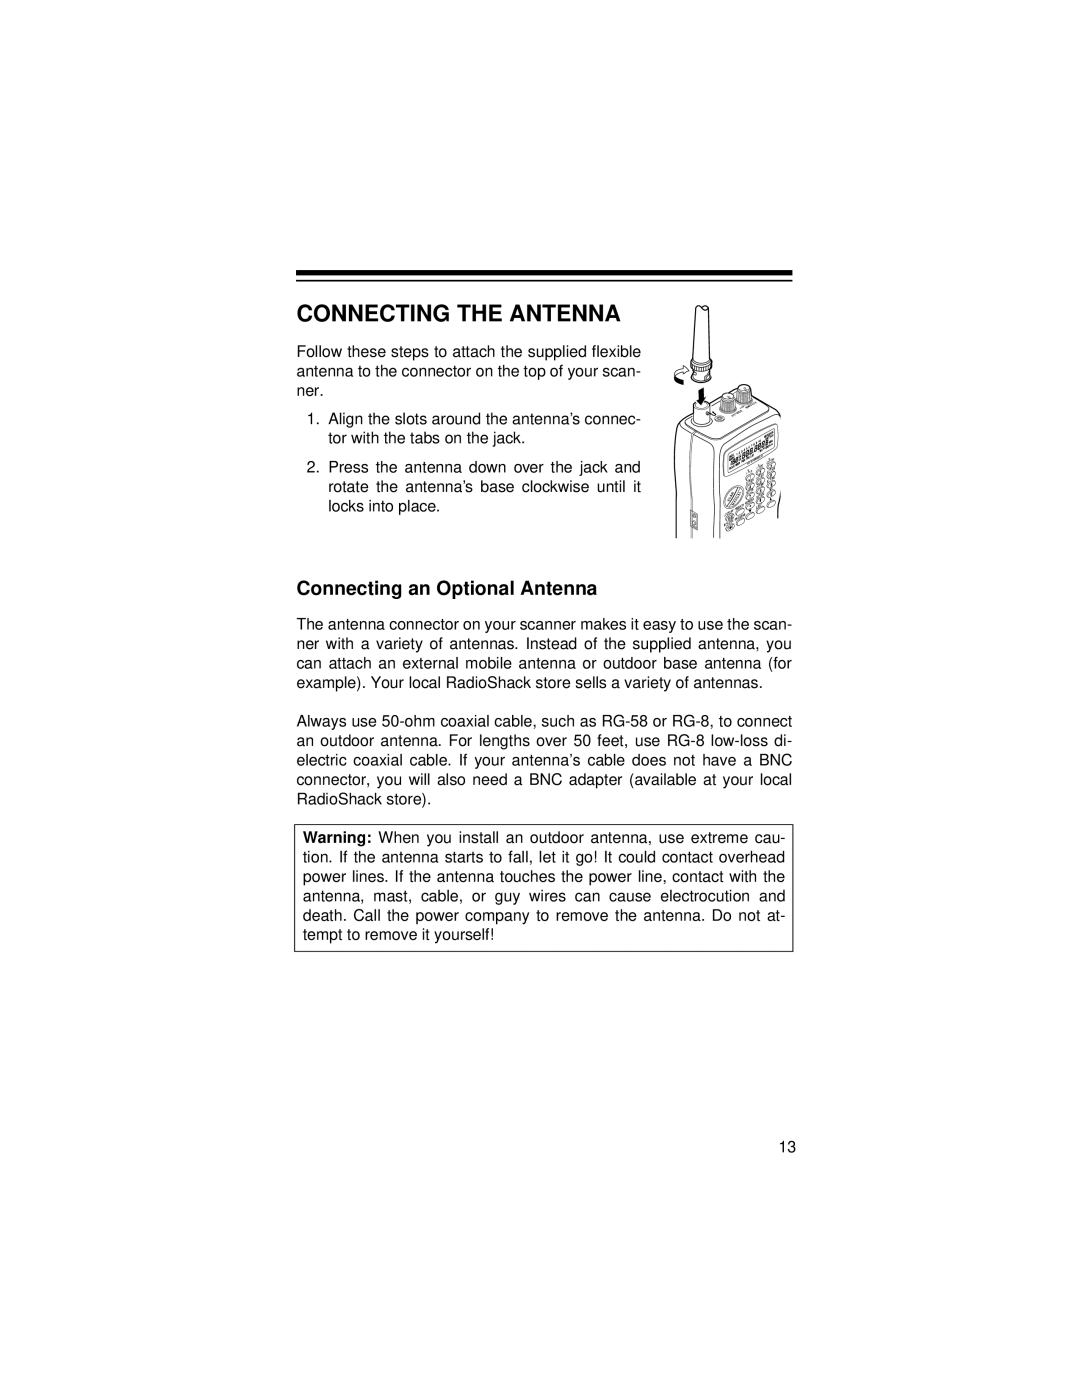 Radio Shack Pro-71 owner manual Connecting the Antenna, Connecting an Optional Antenna 